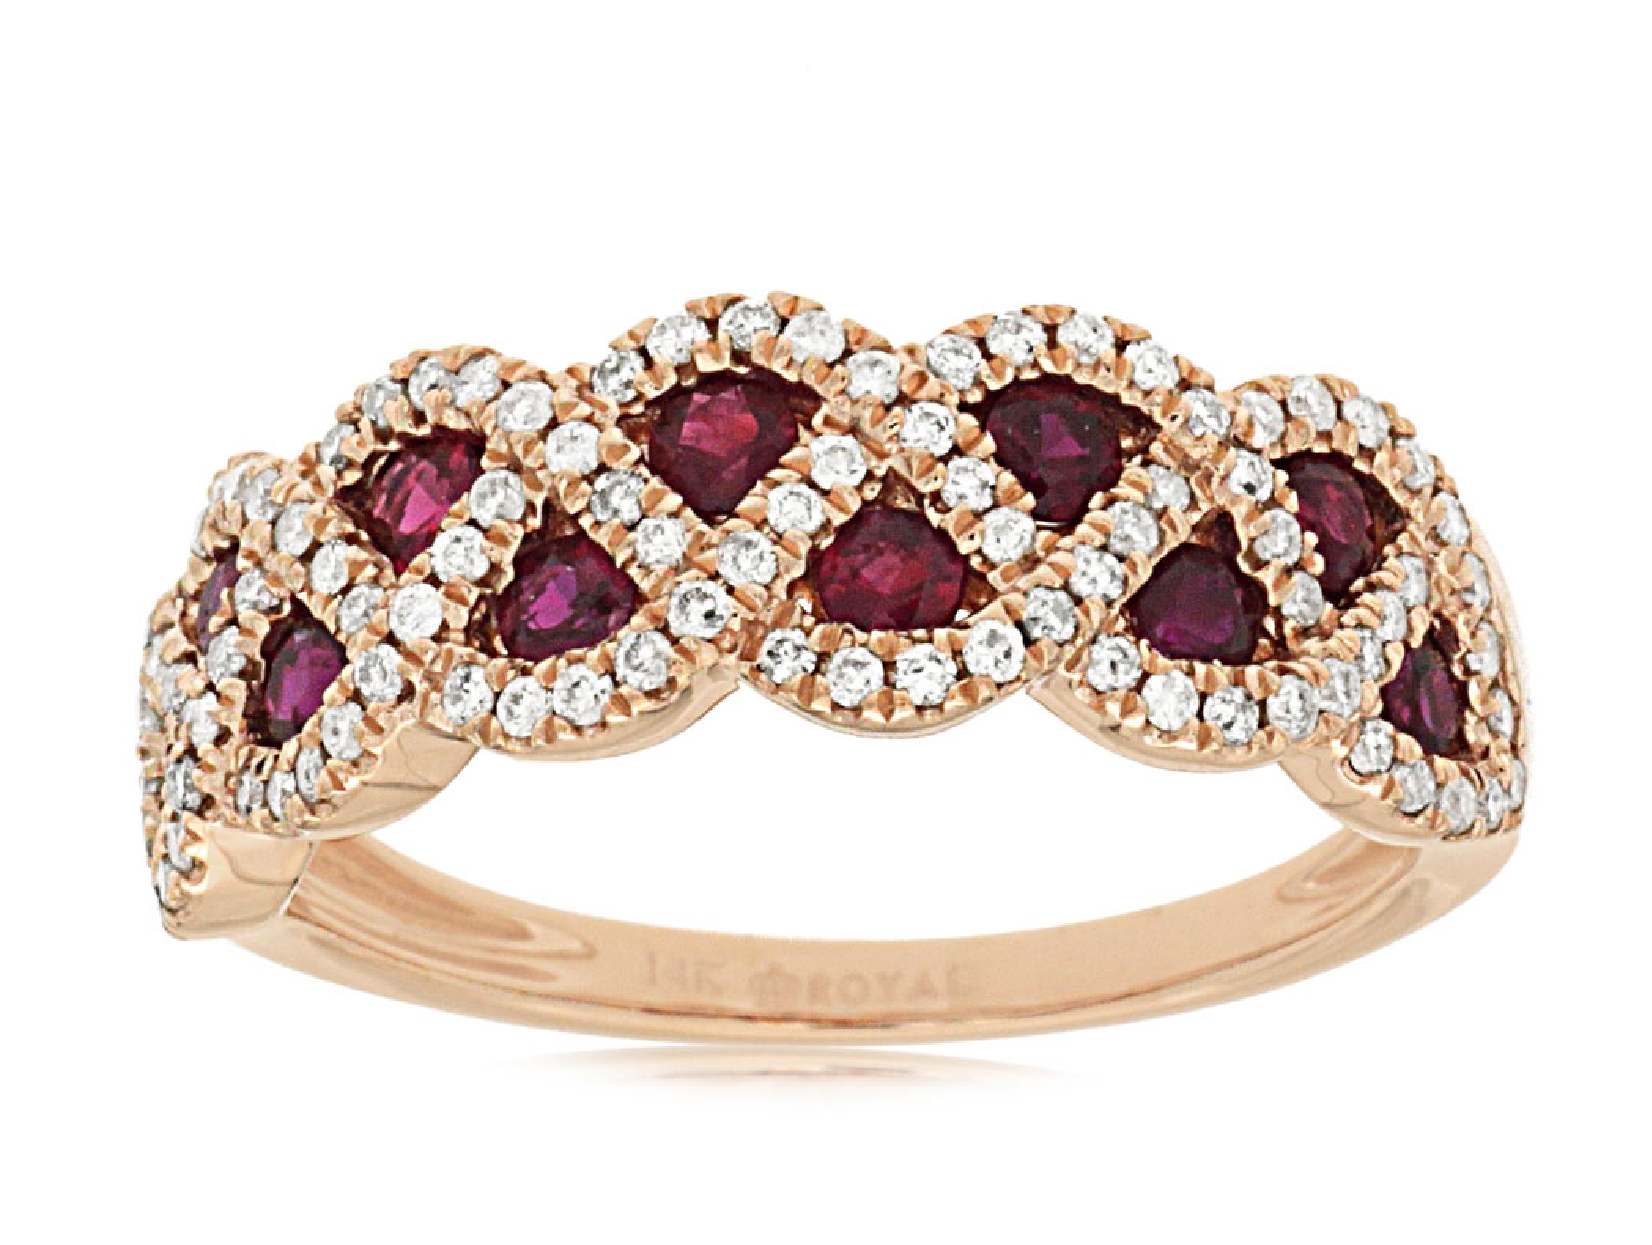 14K Rose Gold Ruby and Diamond Ring with Weaved Design
Size 7 .35CT Diamonds .62CT Rubies

PC7446R